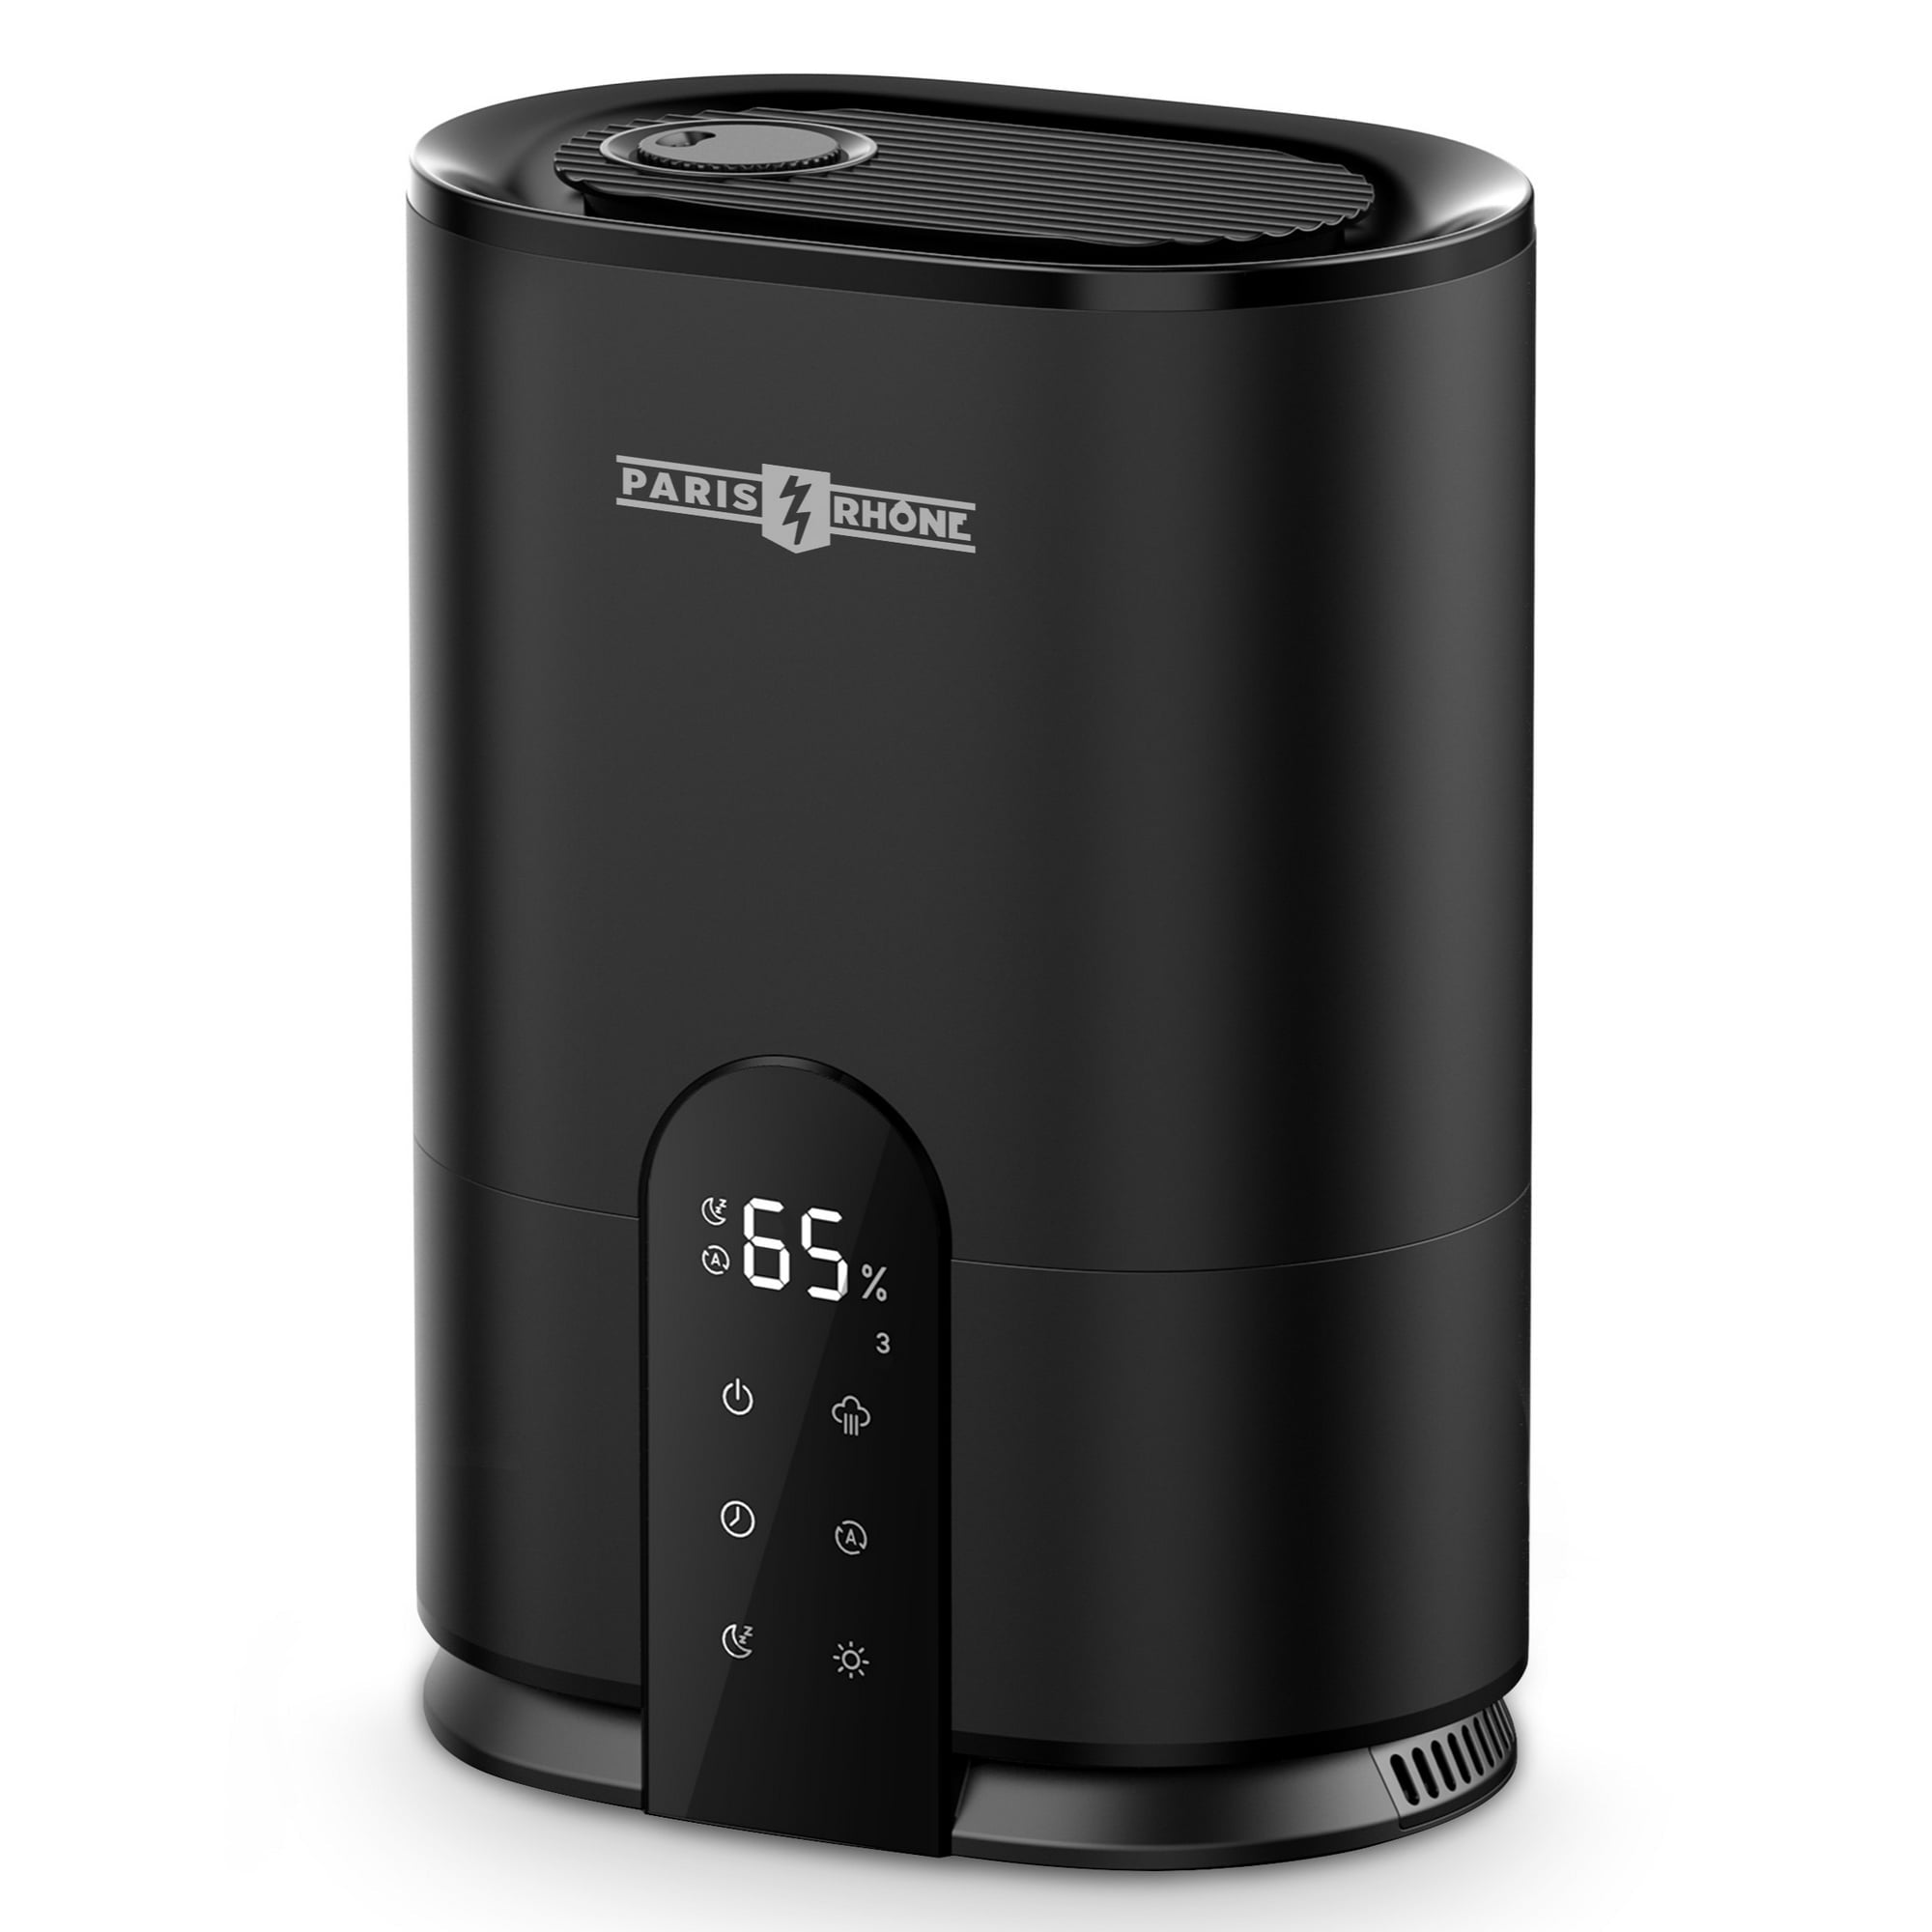 Paris Rhone 4L Ultrasonic Cool Mist Humidifier for Large Rooms with Humidistat & 30Hrs Timer